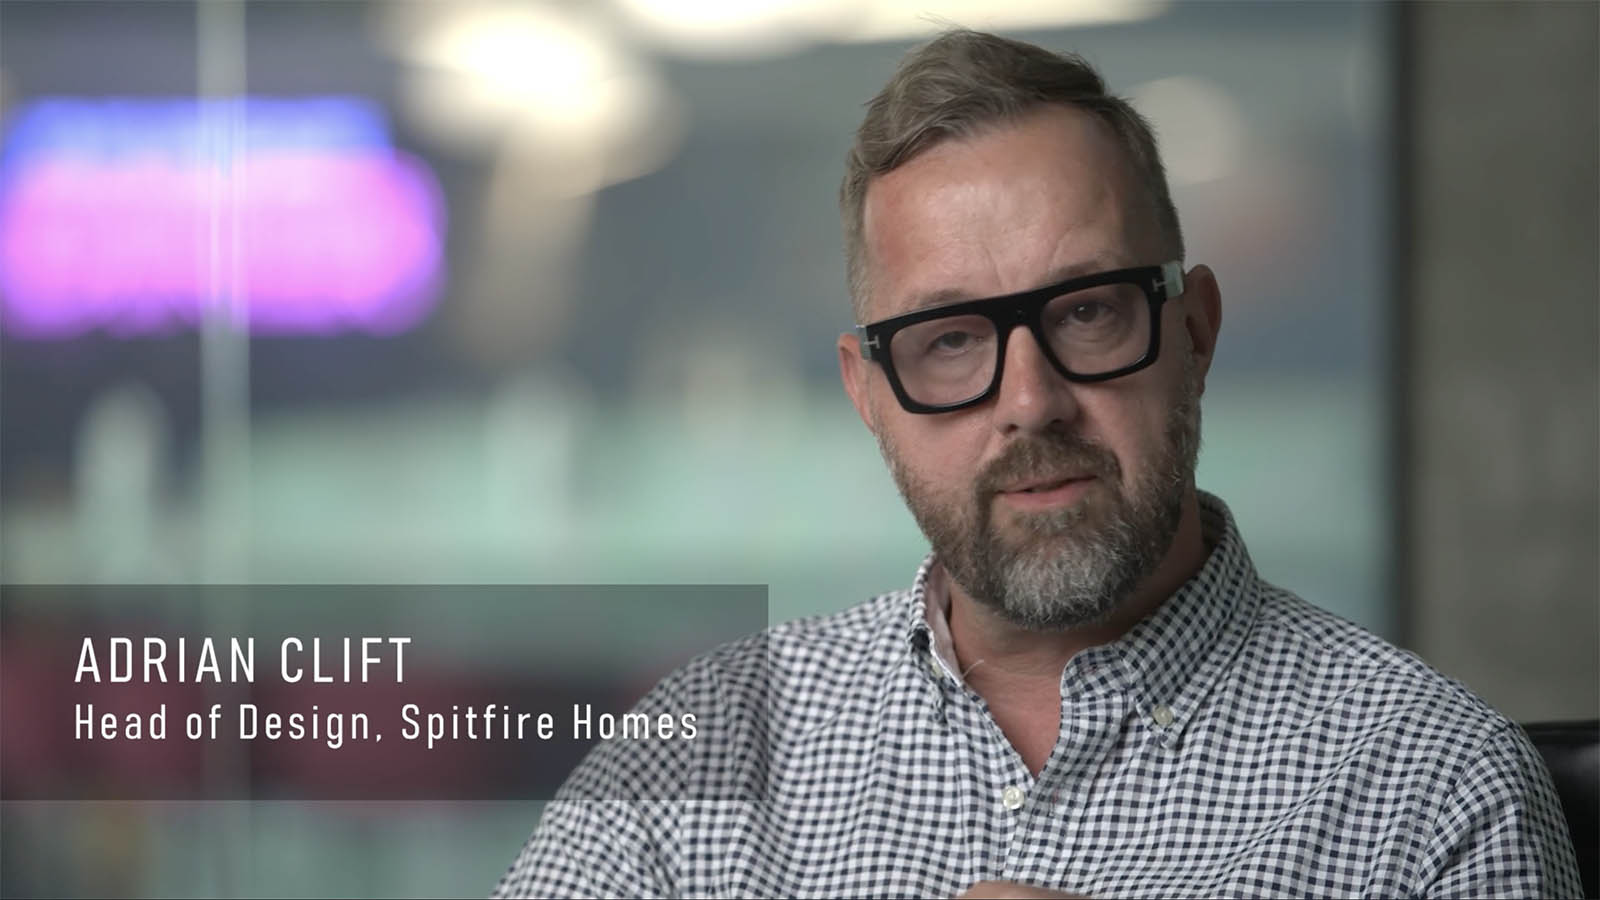 Adrian Clift of Spitfire Homes